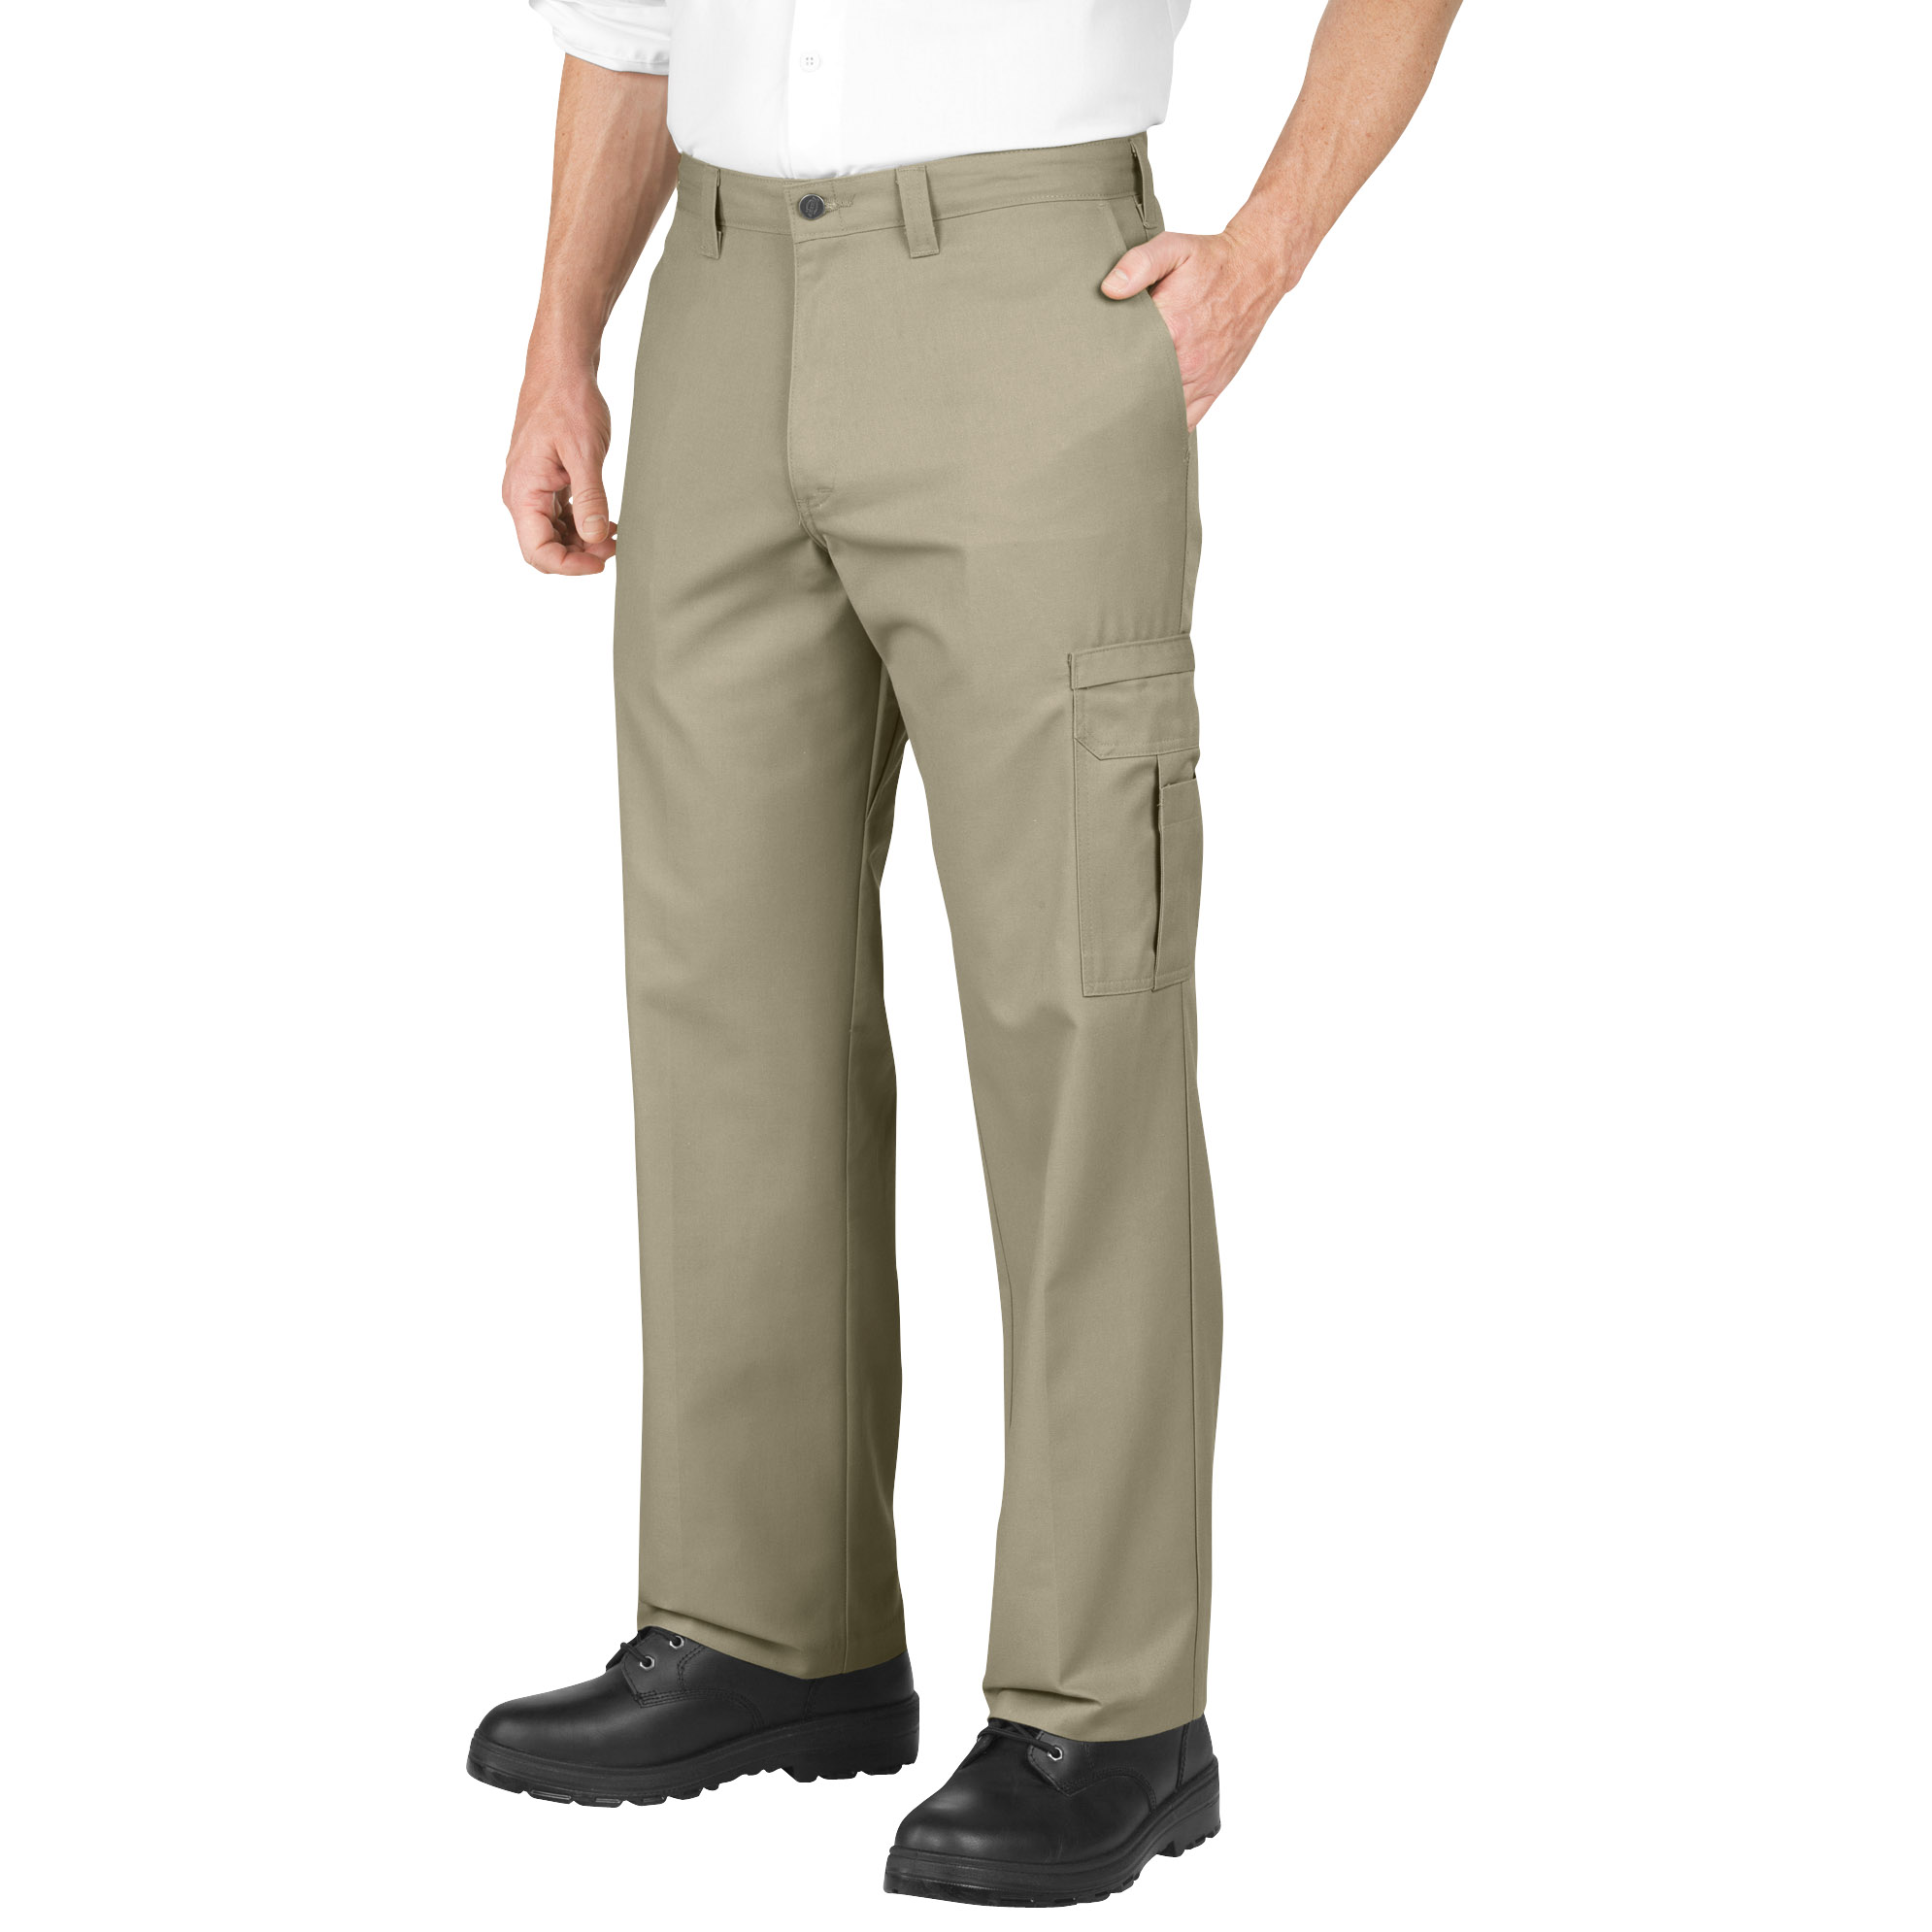 Dickies LP2372 Industrial Relaxed Fit Cargo Pants - Desert Sand